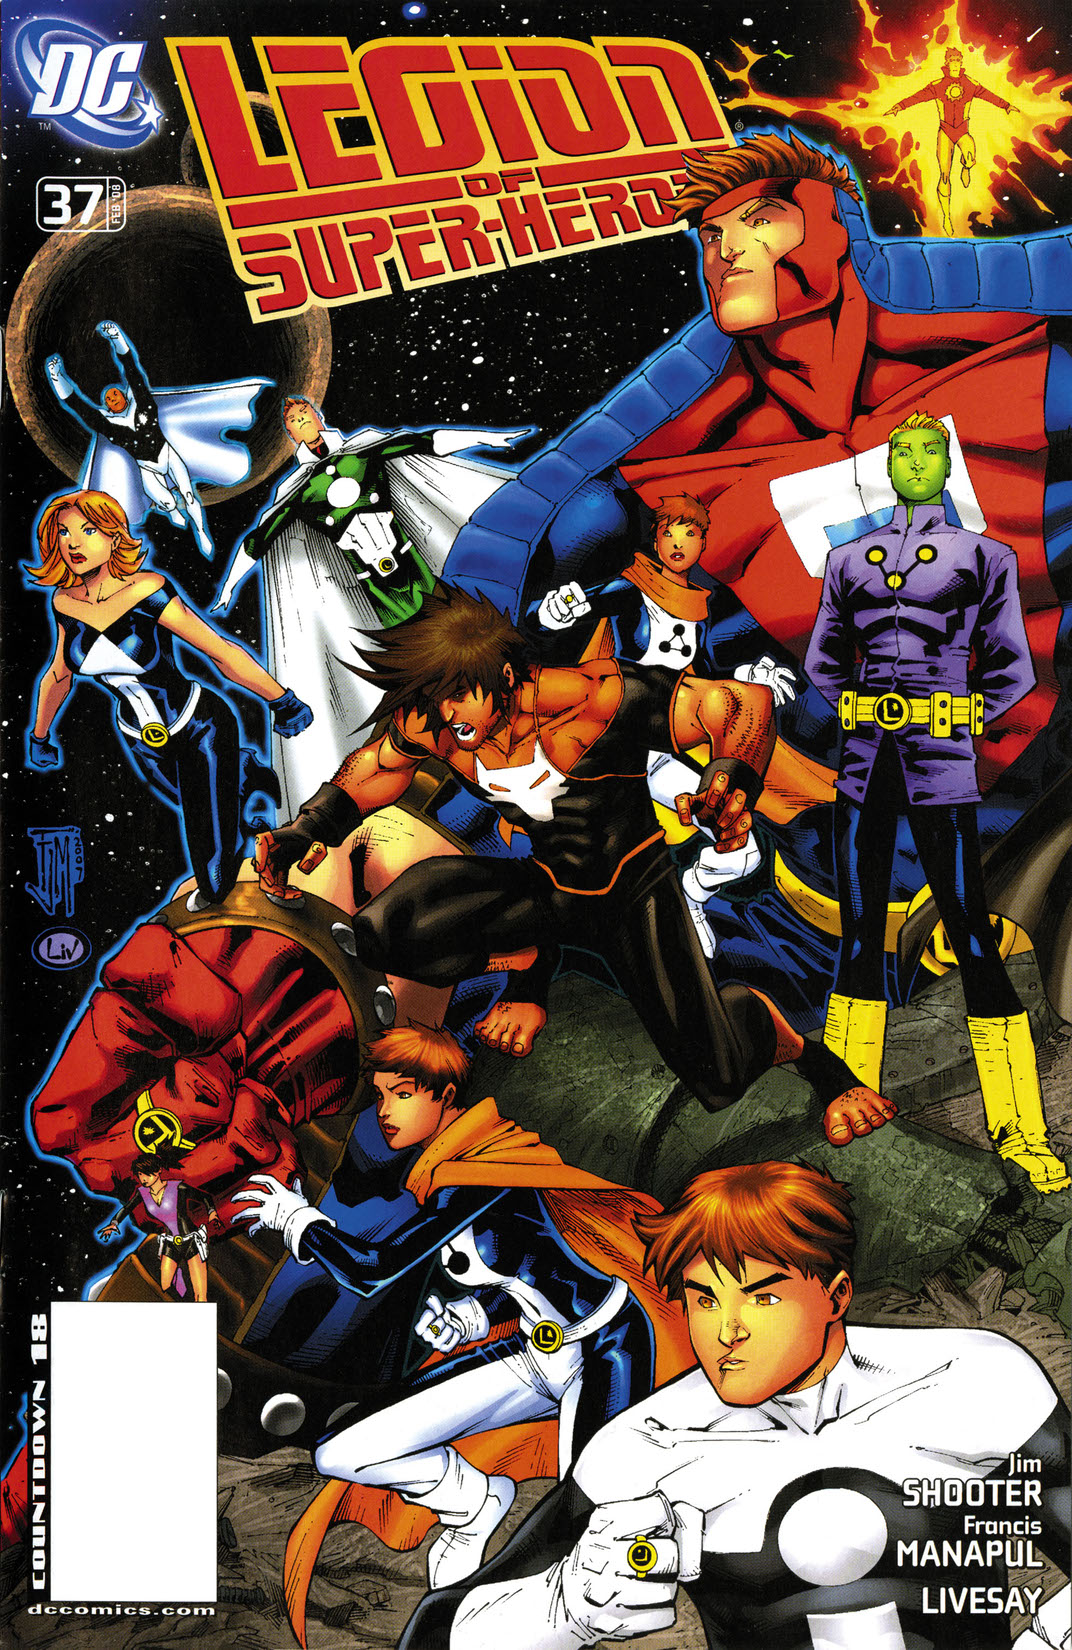 Legion of Super-Heroes (2007-) #37 preview images